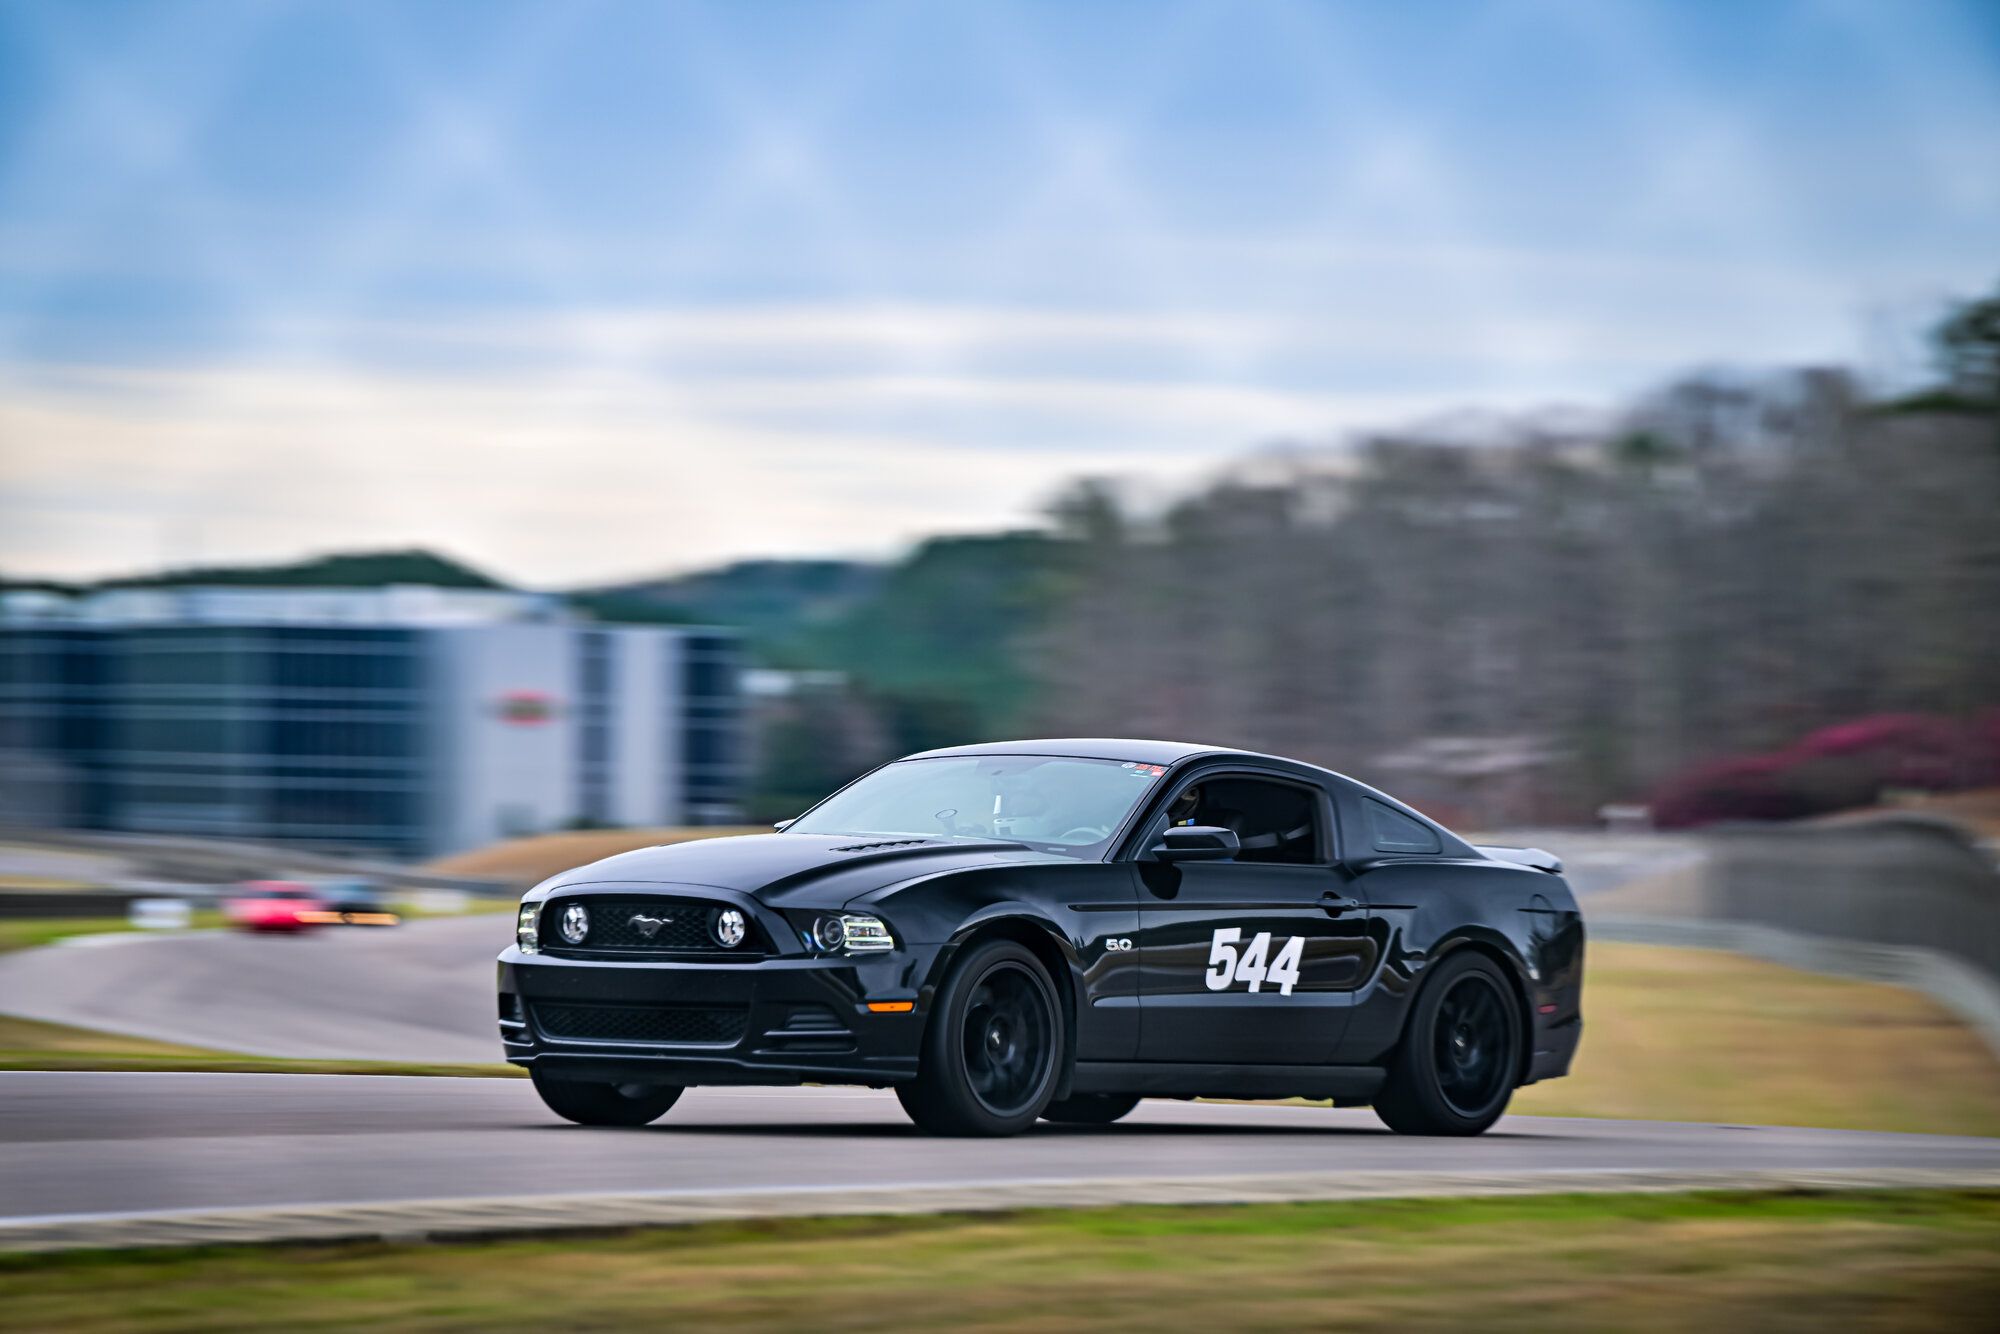 2014 Mustang
GT_50L AutoX -  (14' Mustang GT Track Pack)